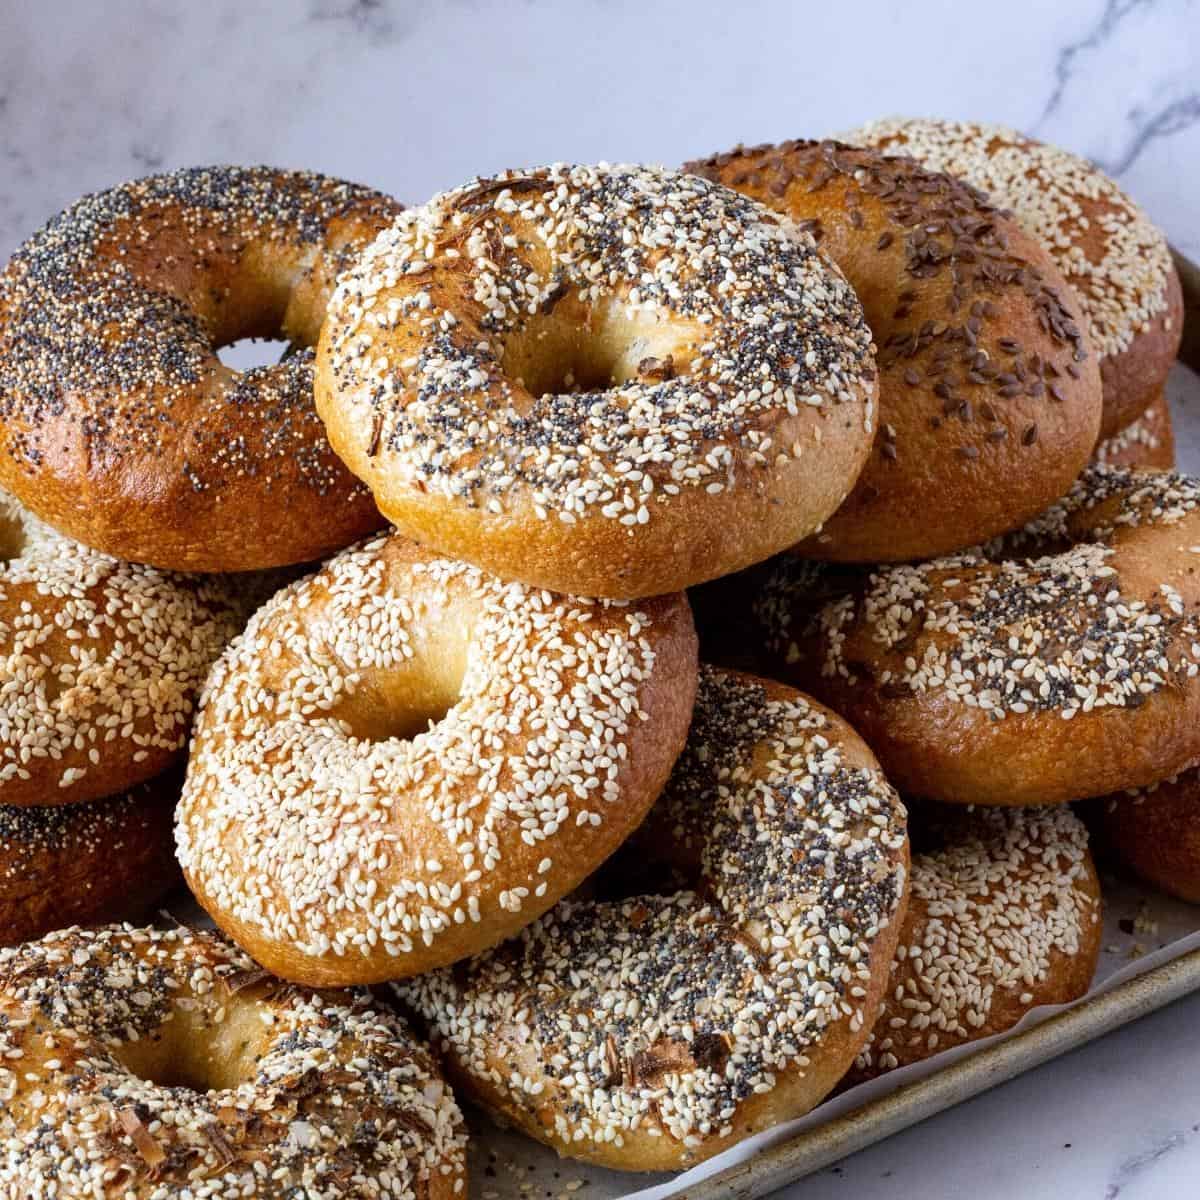 A baking tray with a stack of bagels.